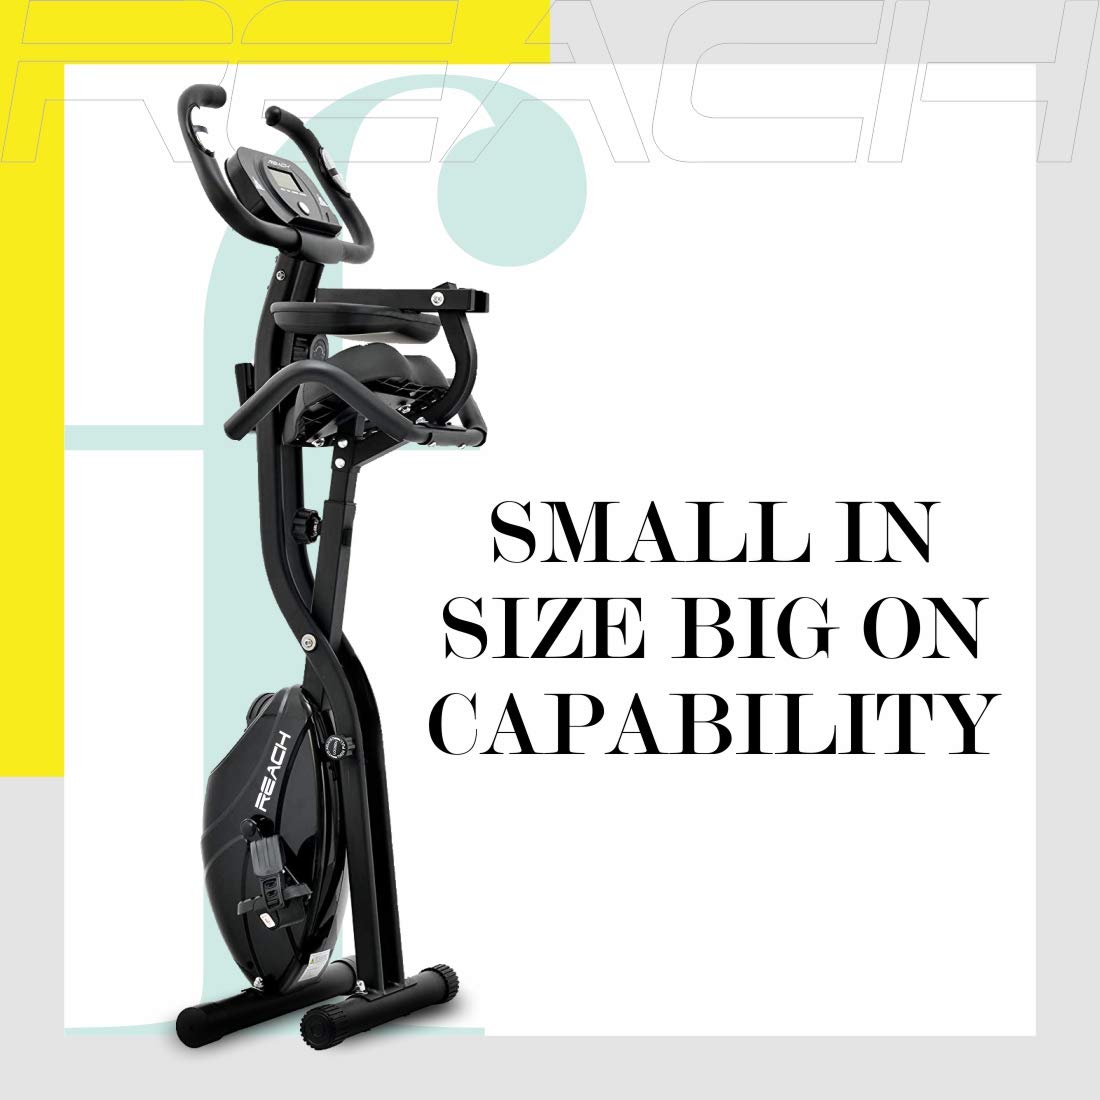 Reach Contempo Foldable Exercise Bike is the best upright exercise bike in India